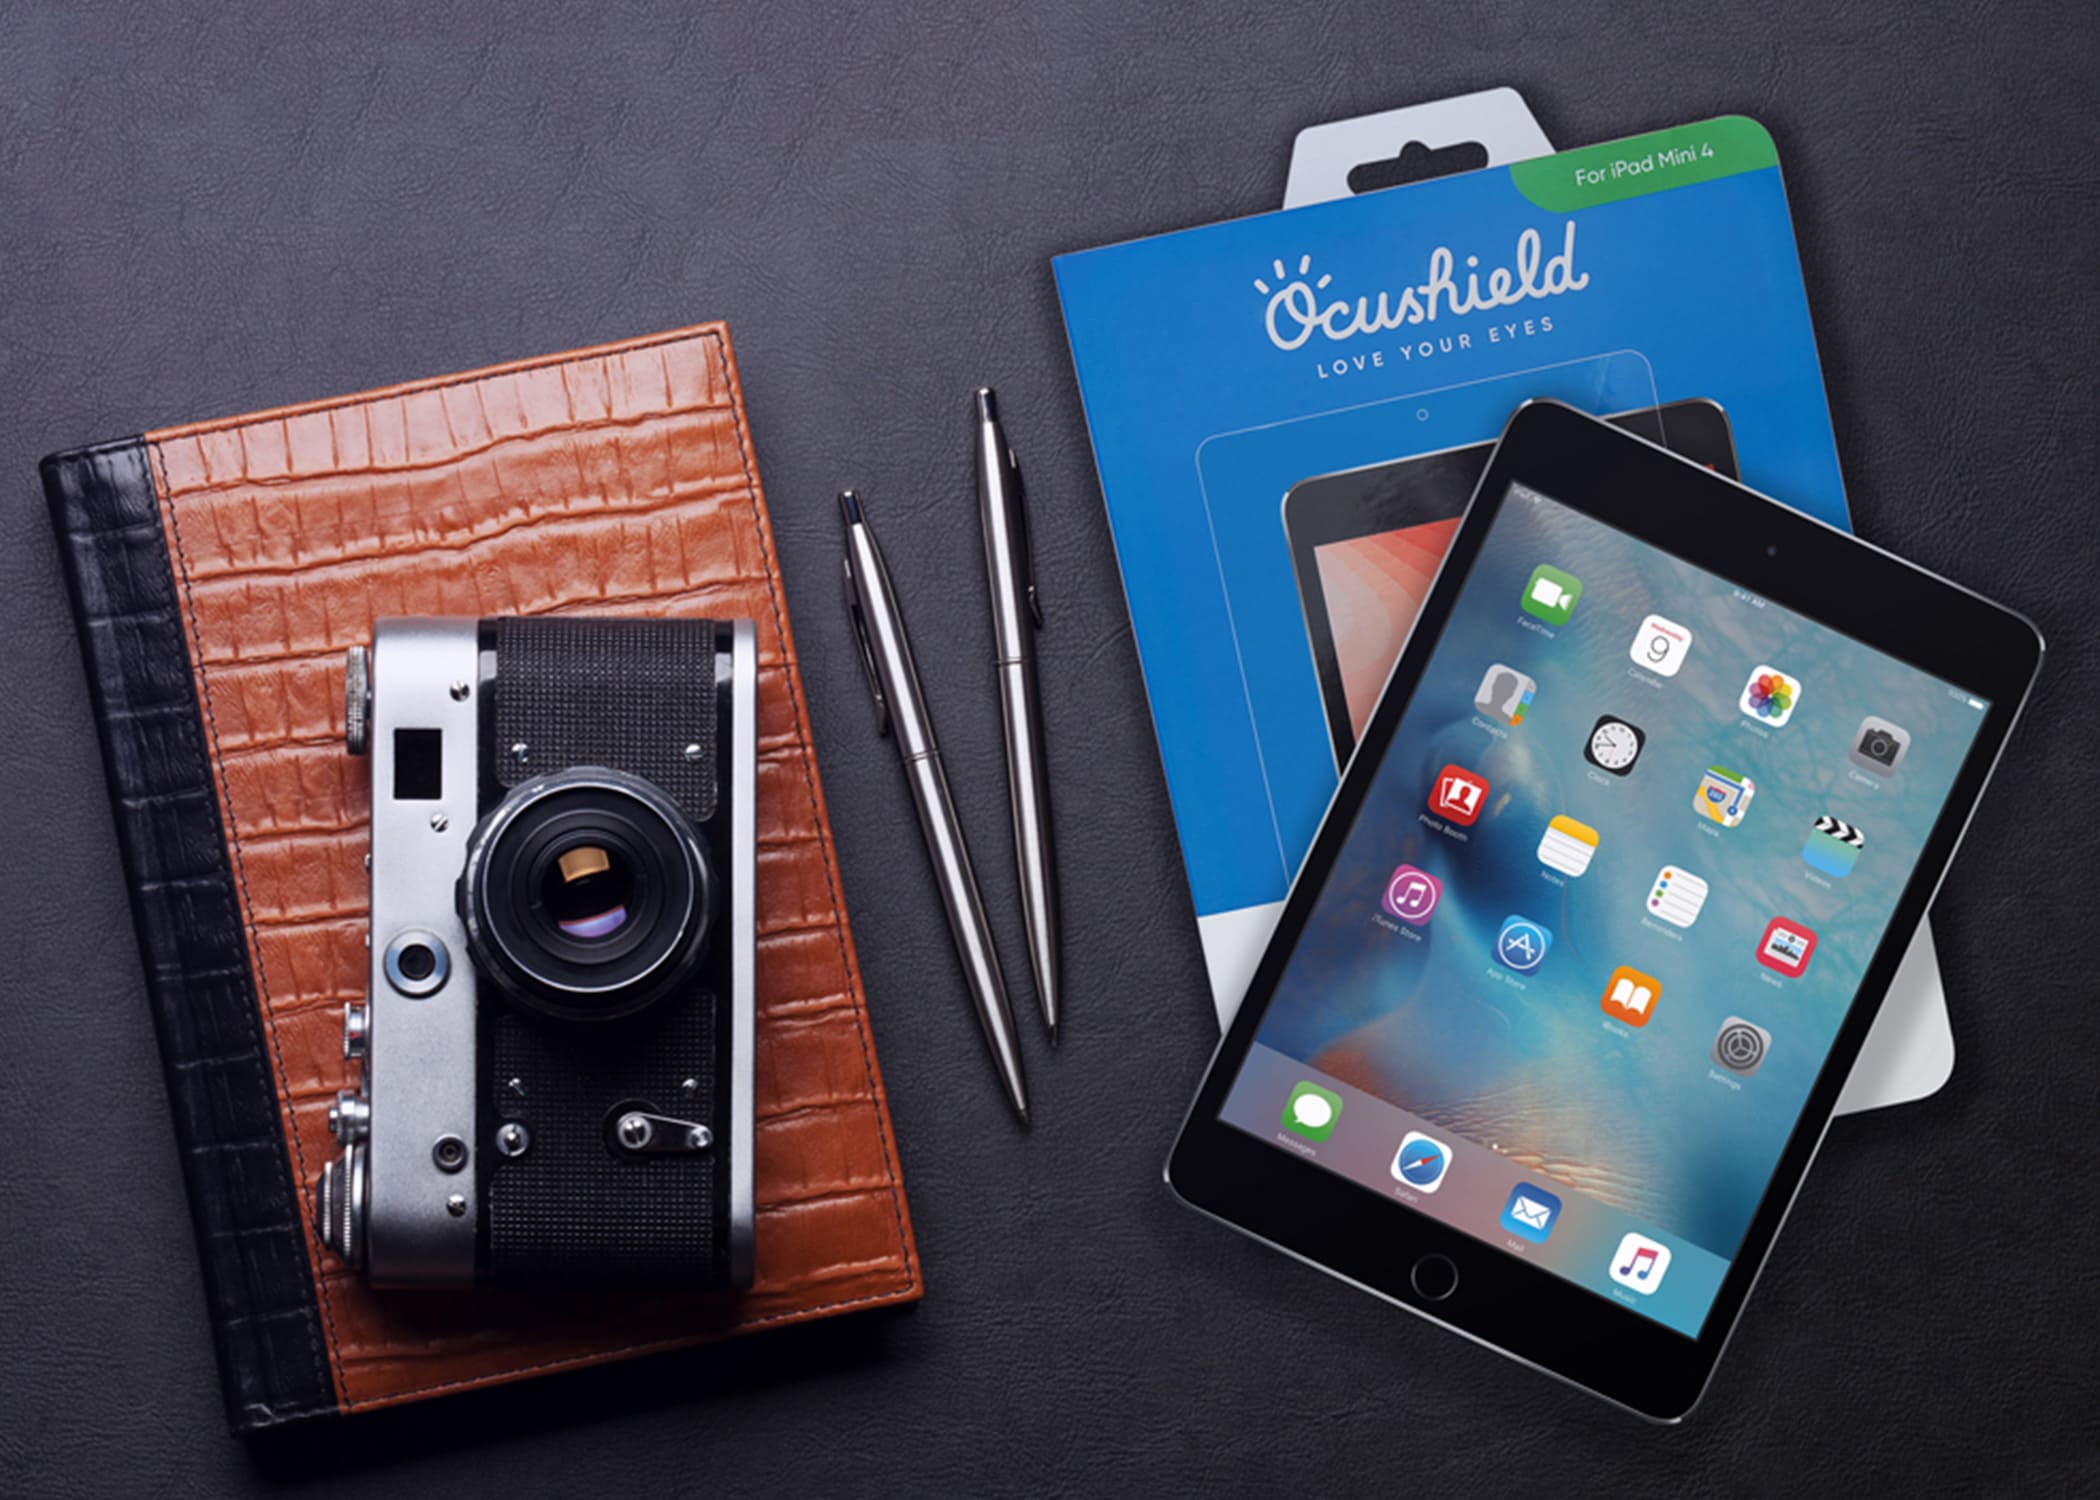 Photo of a camera on top of a leather notebook next to an Ocushield blue light tablet screen protector and the box from Ocushield